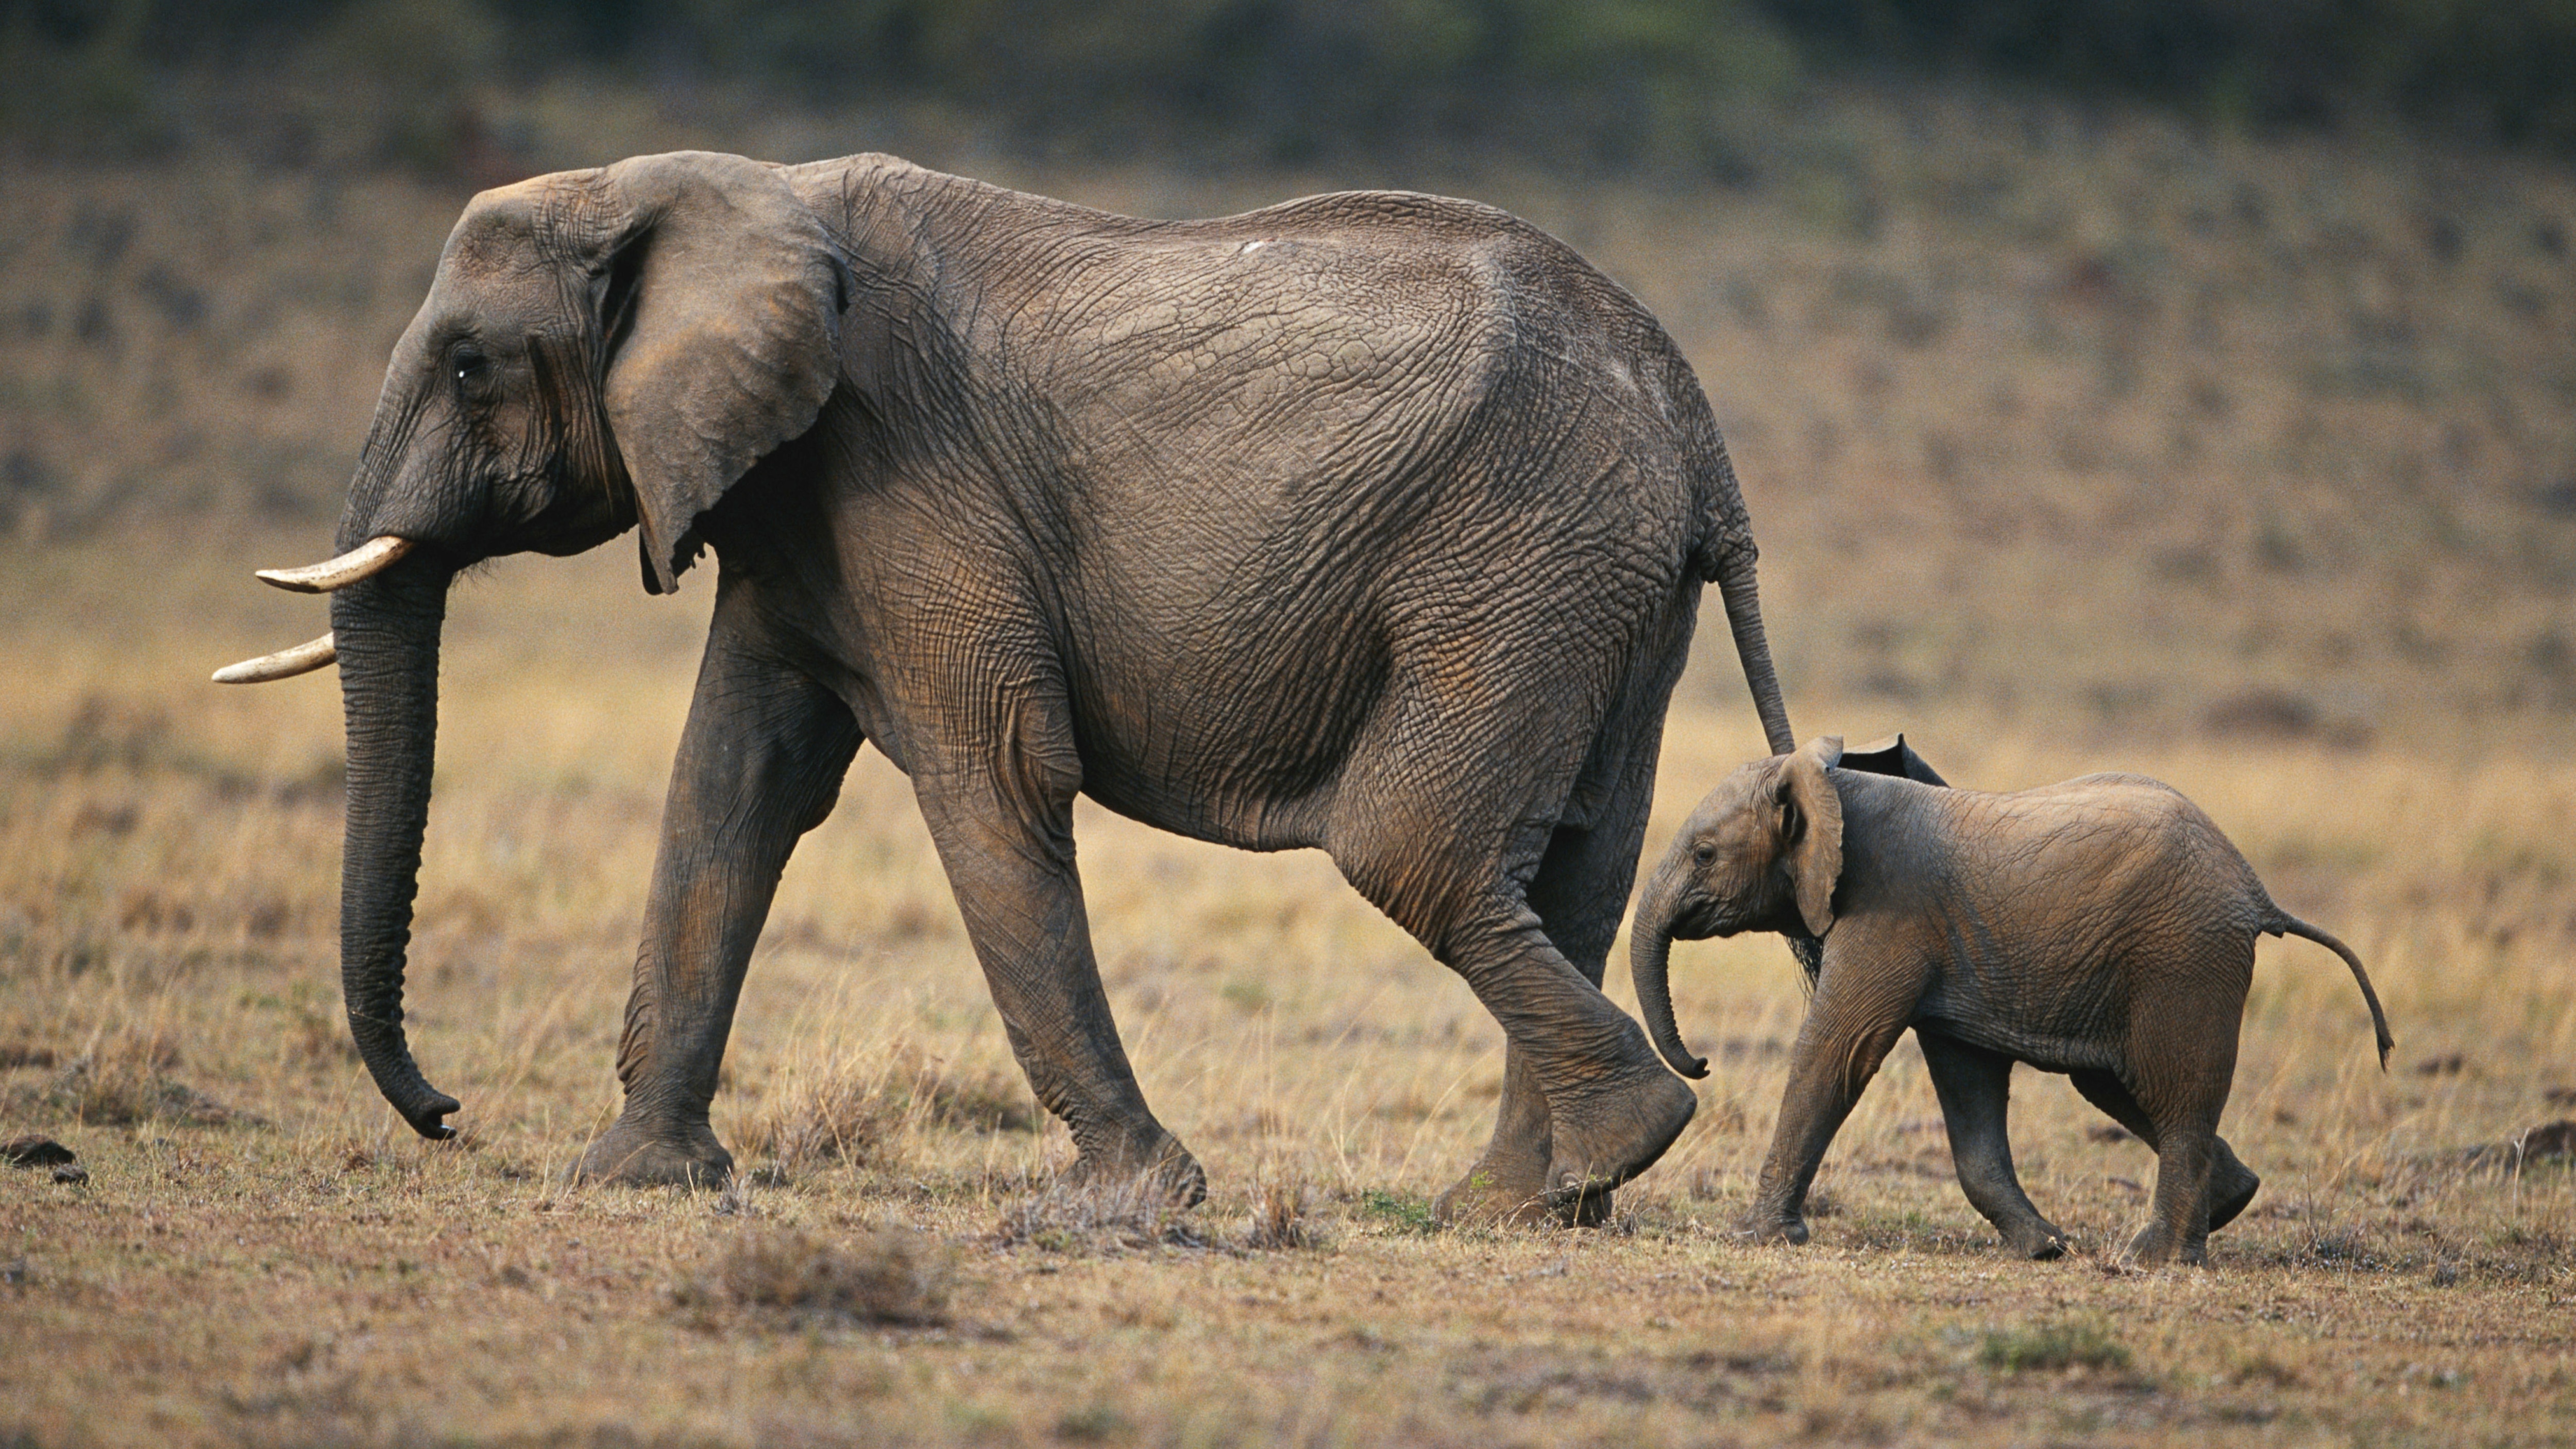 What is the average gestation age for elephants?